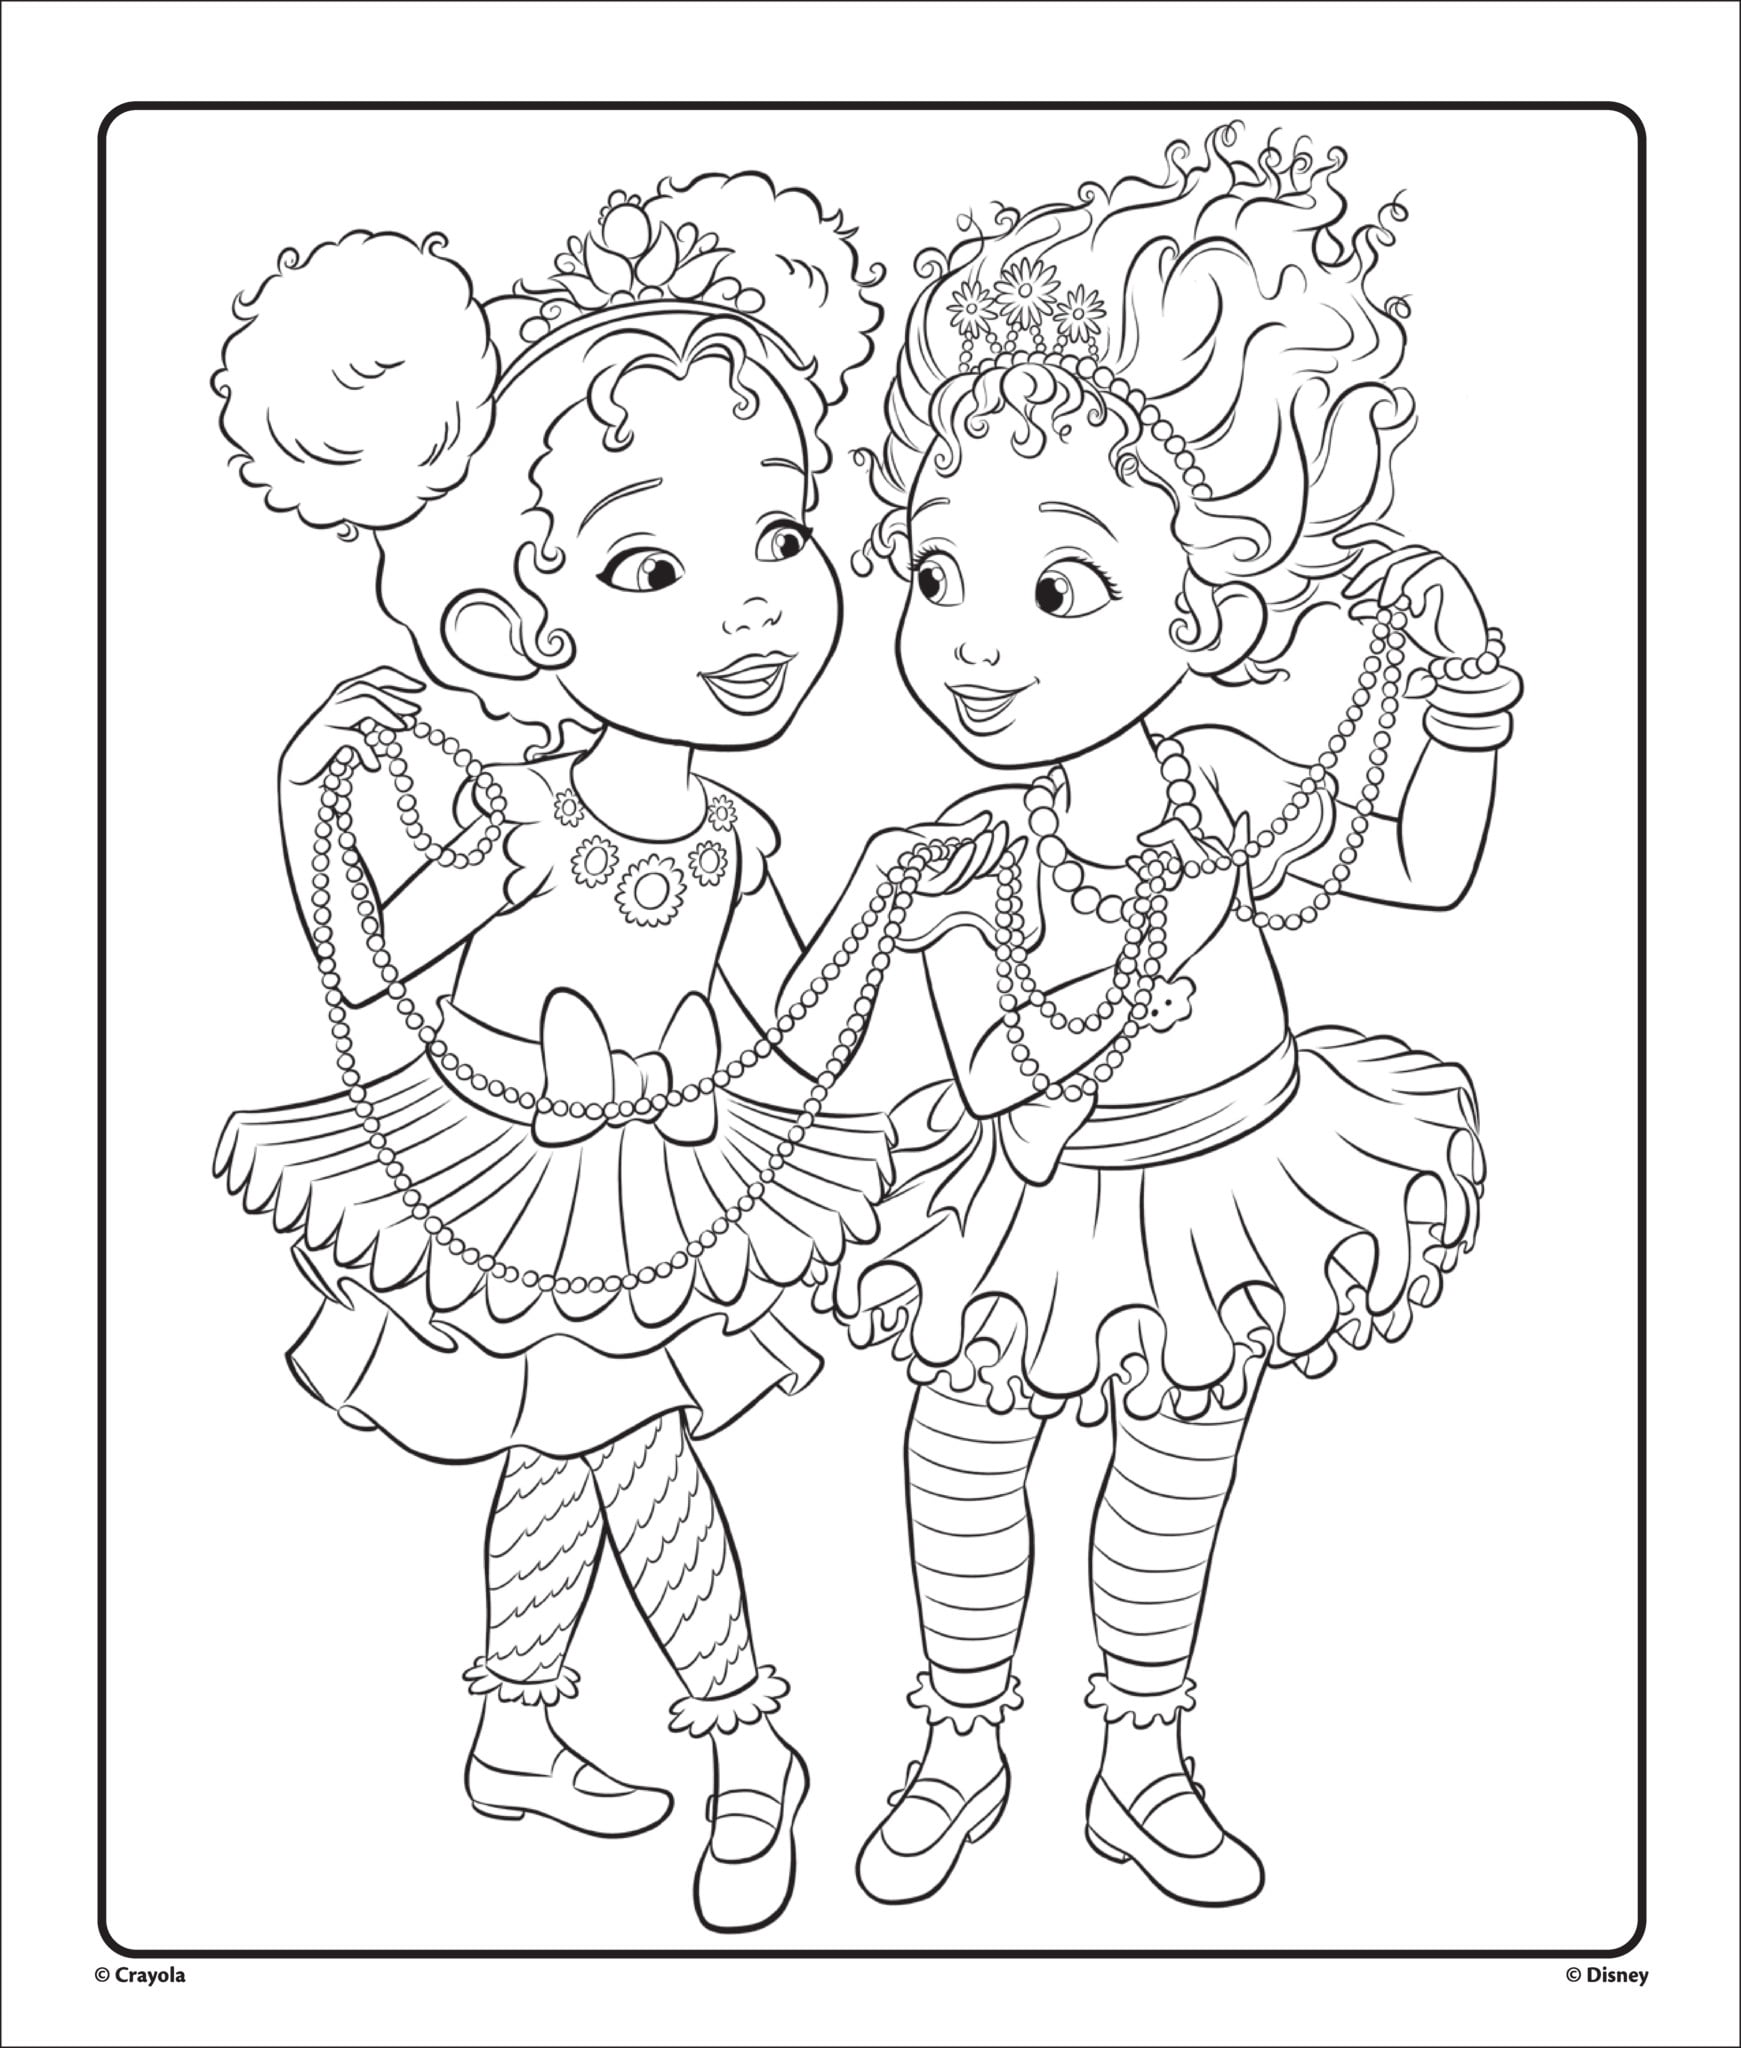 5-crayola-fancy-nancy-coloring-pages-sticker-sheets-6-4-ages-3-gift-for-girls-7-drawing